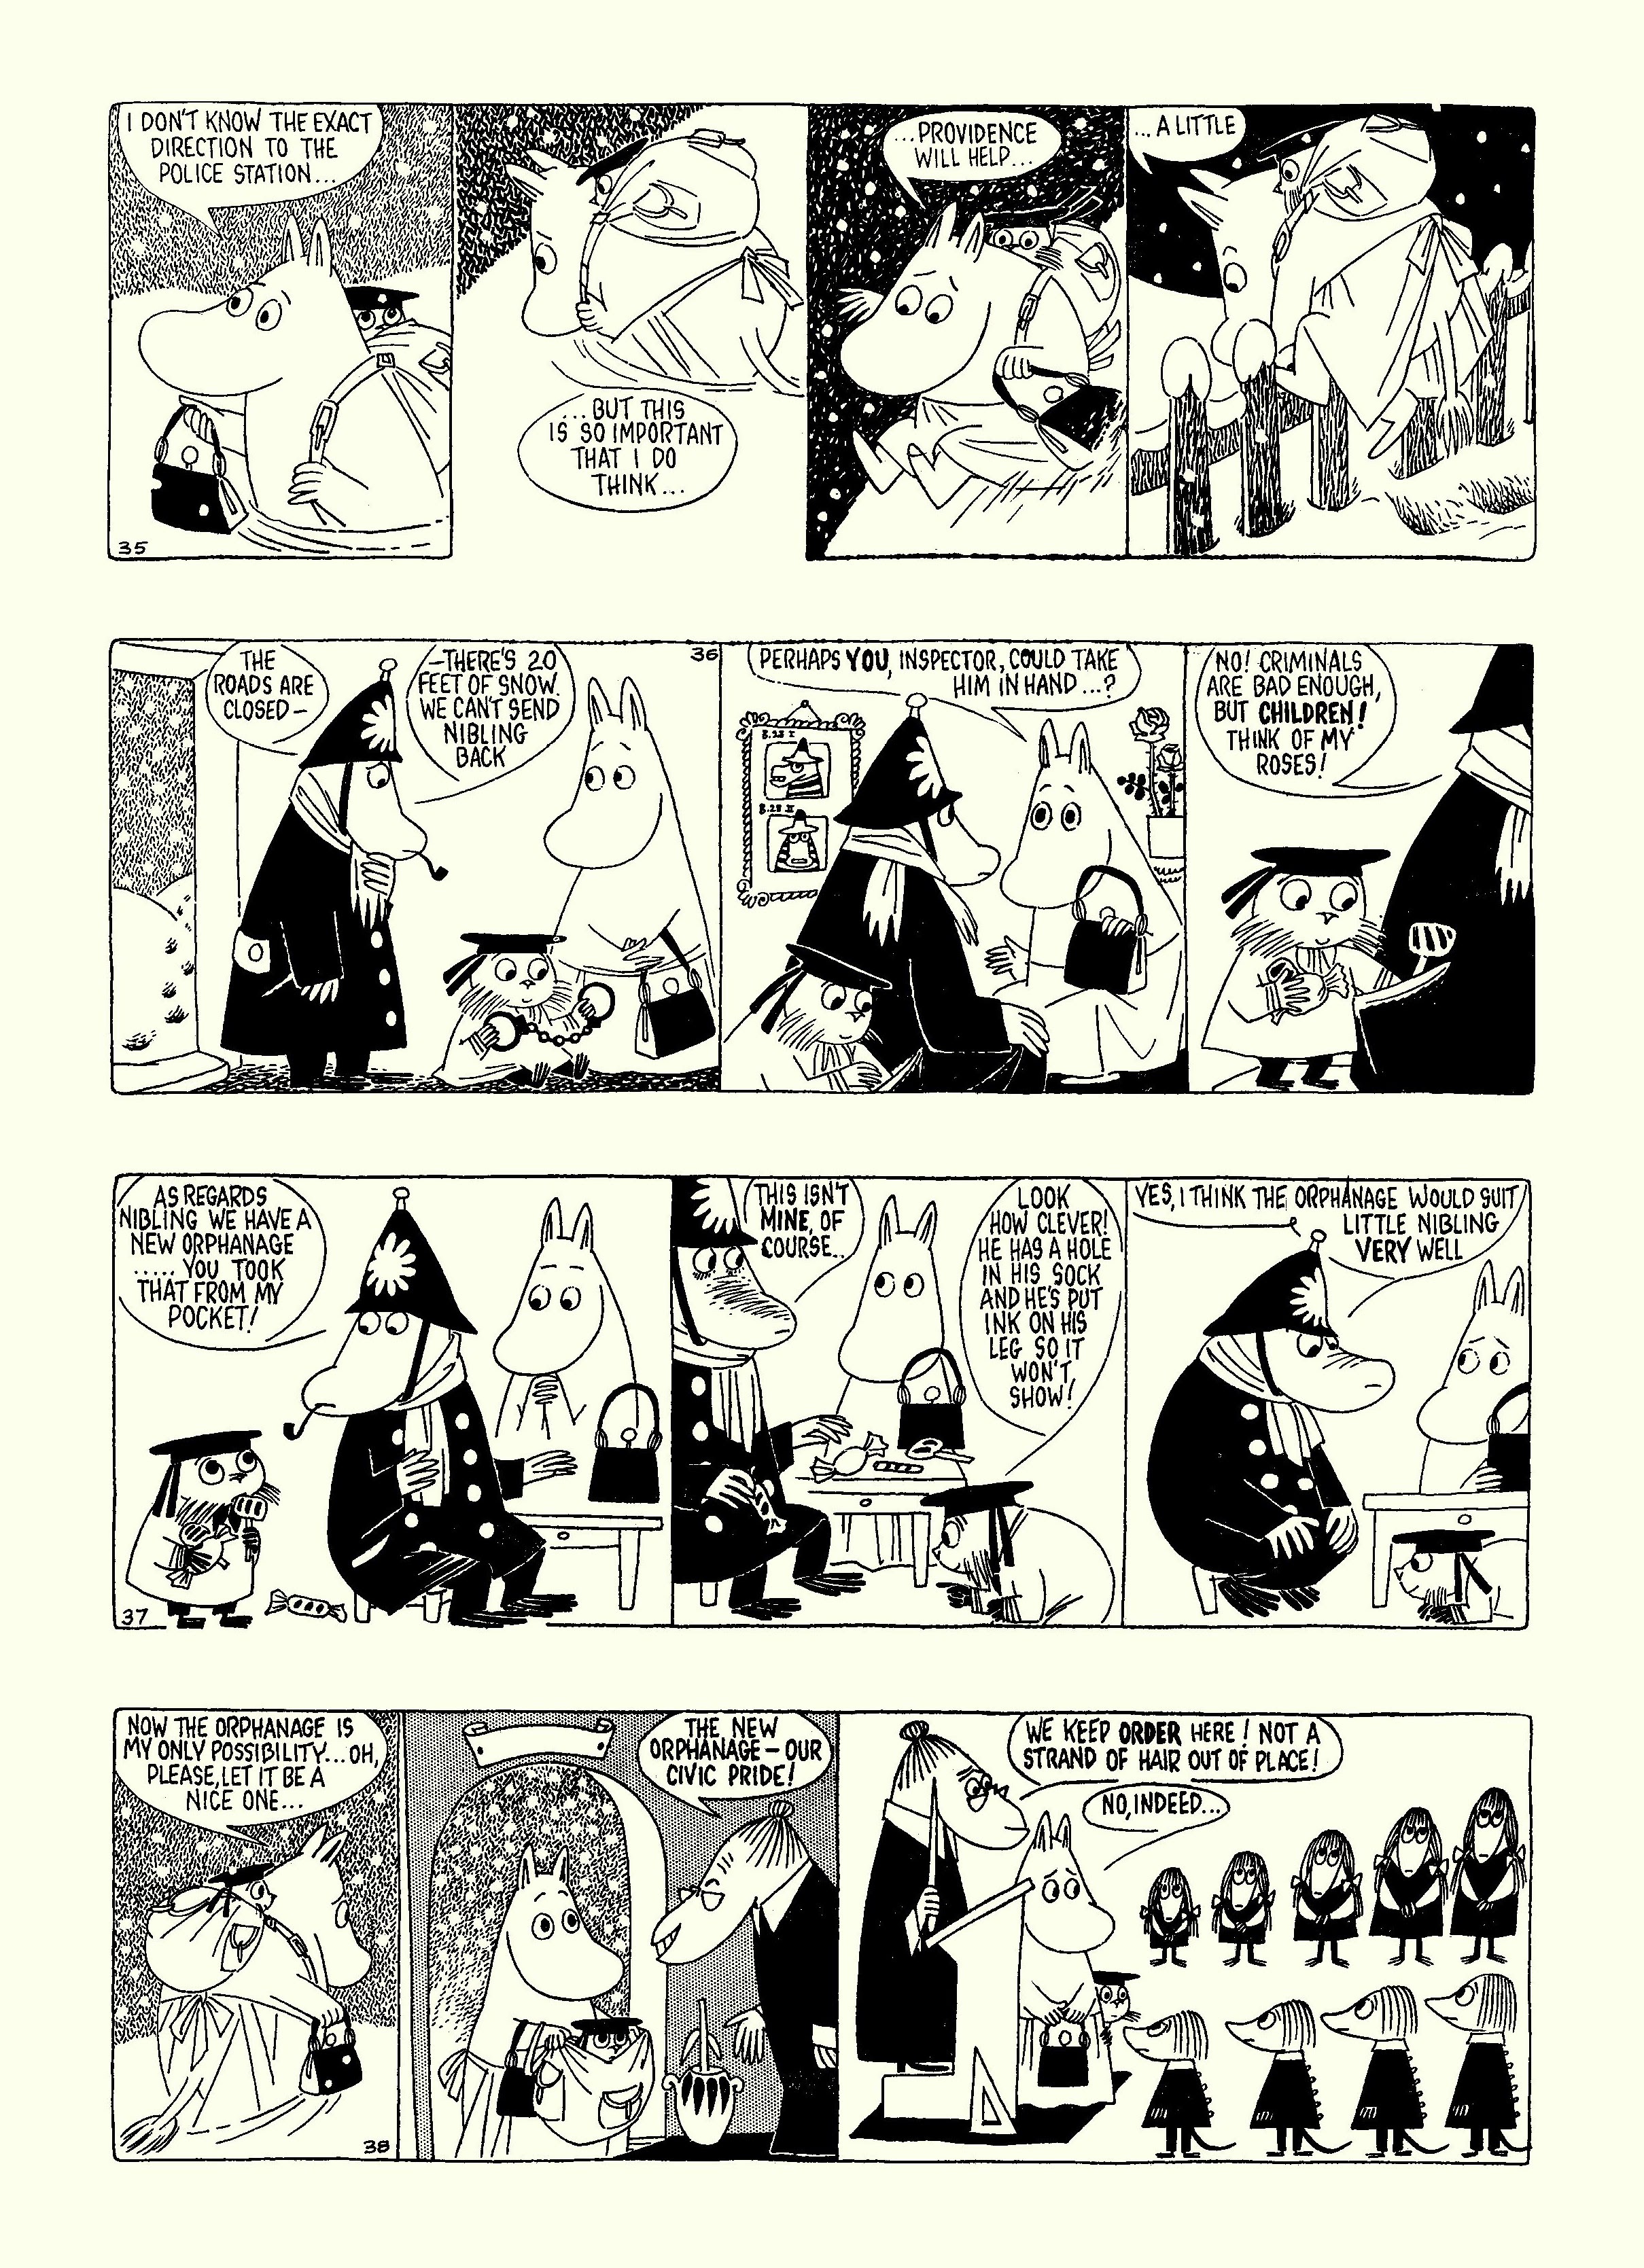 Read online Moomin: The Complete Tove Jansson Comic Strip comic -  Issue # TPB 5 - 15